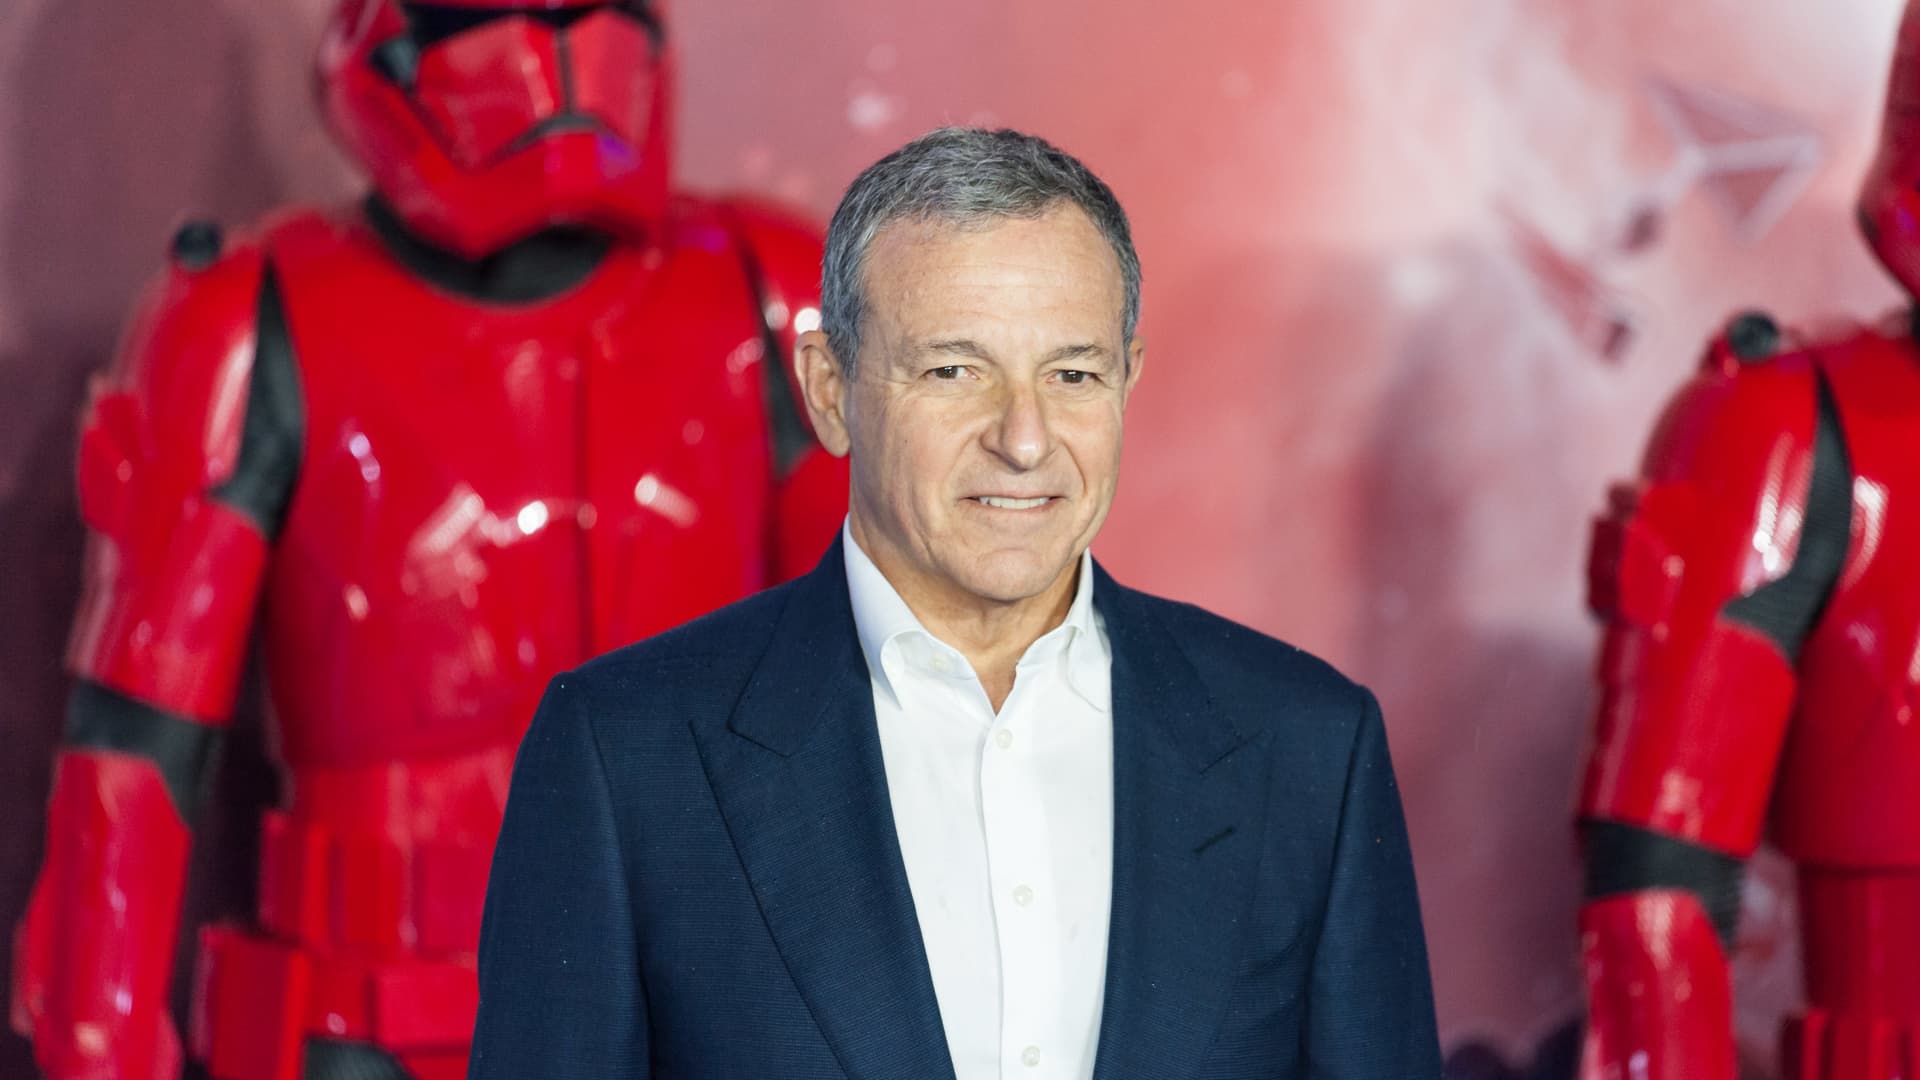 Disney CEO, Bob Iger attends the European film premiere of 'Star Wars: The Rise of Skywalker' at Cineworld Leicester Square on 18 December, 2019 in London, England.